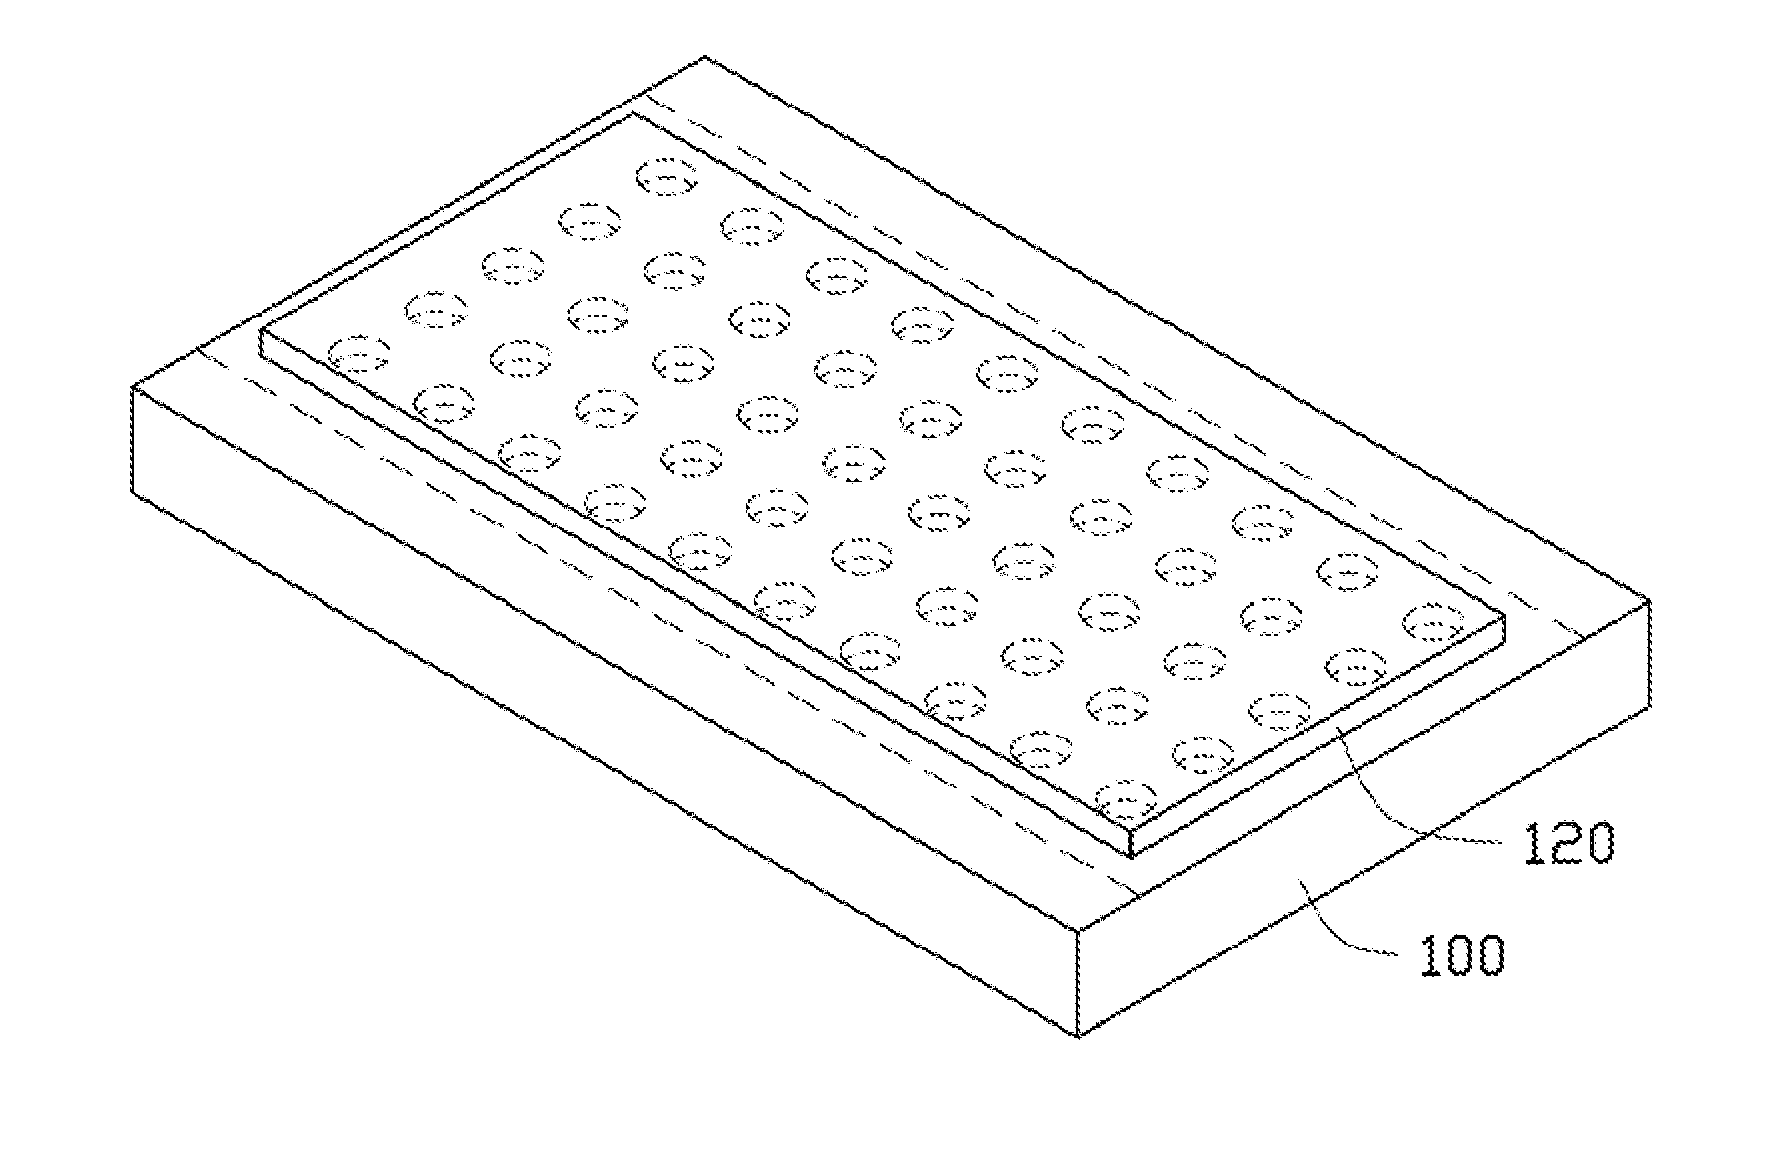 Carbon nanotube film supporting structure and method for using same